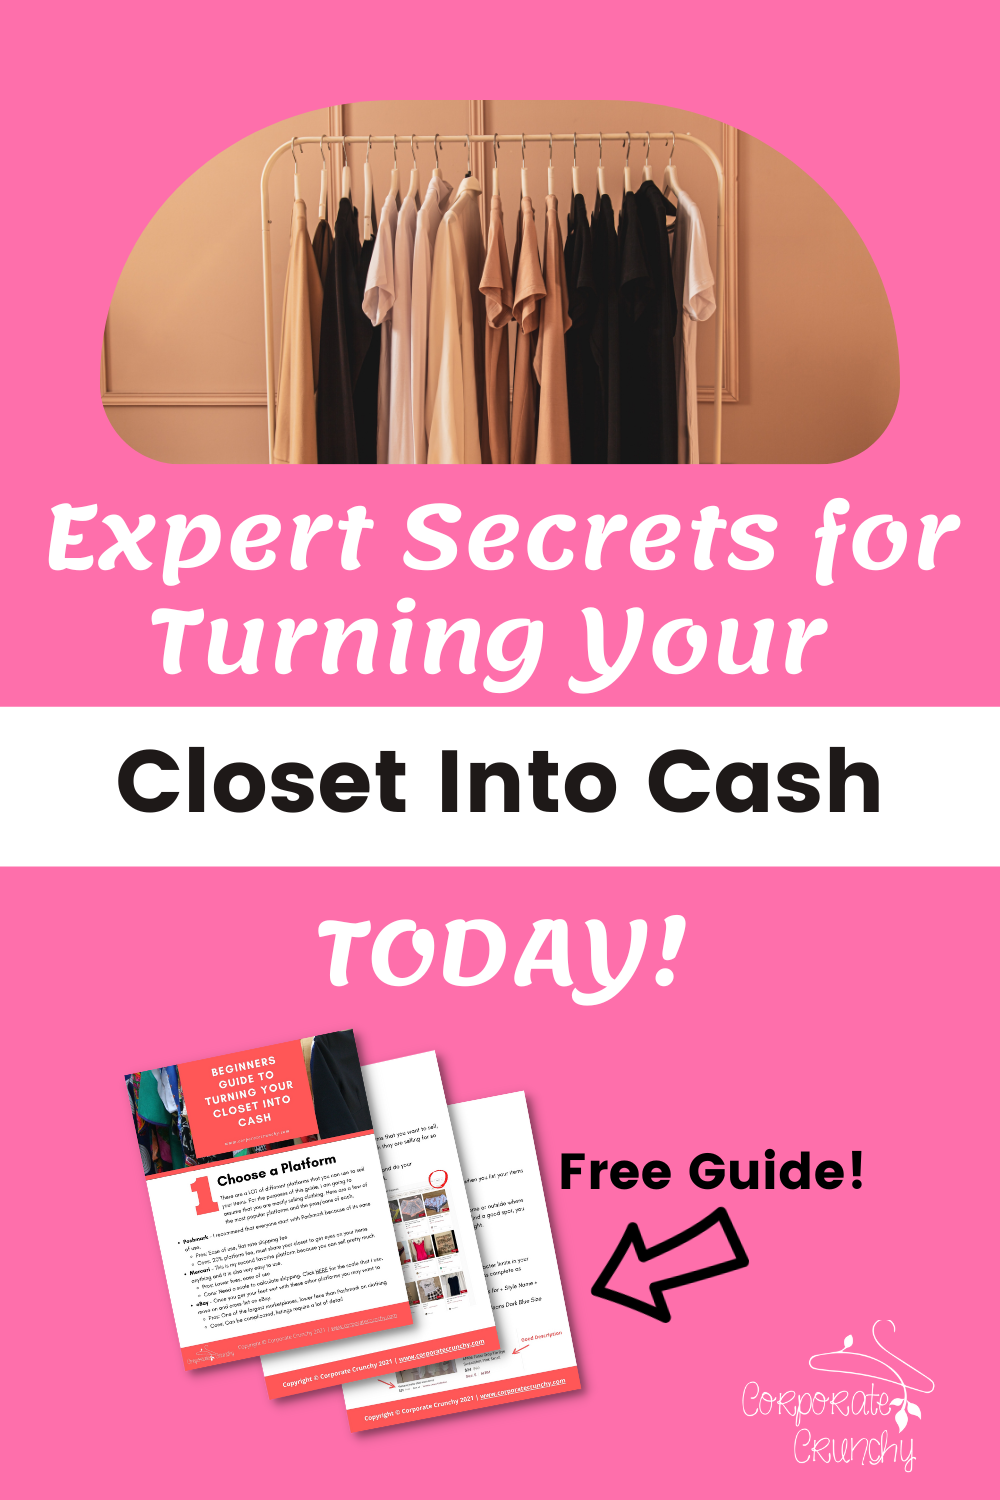 image of closet with text Expert secrets for turning your closet into cash